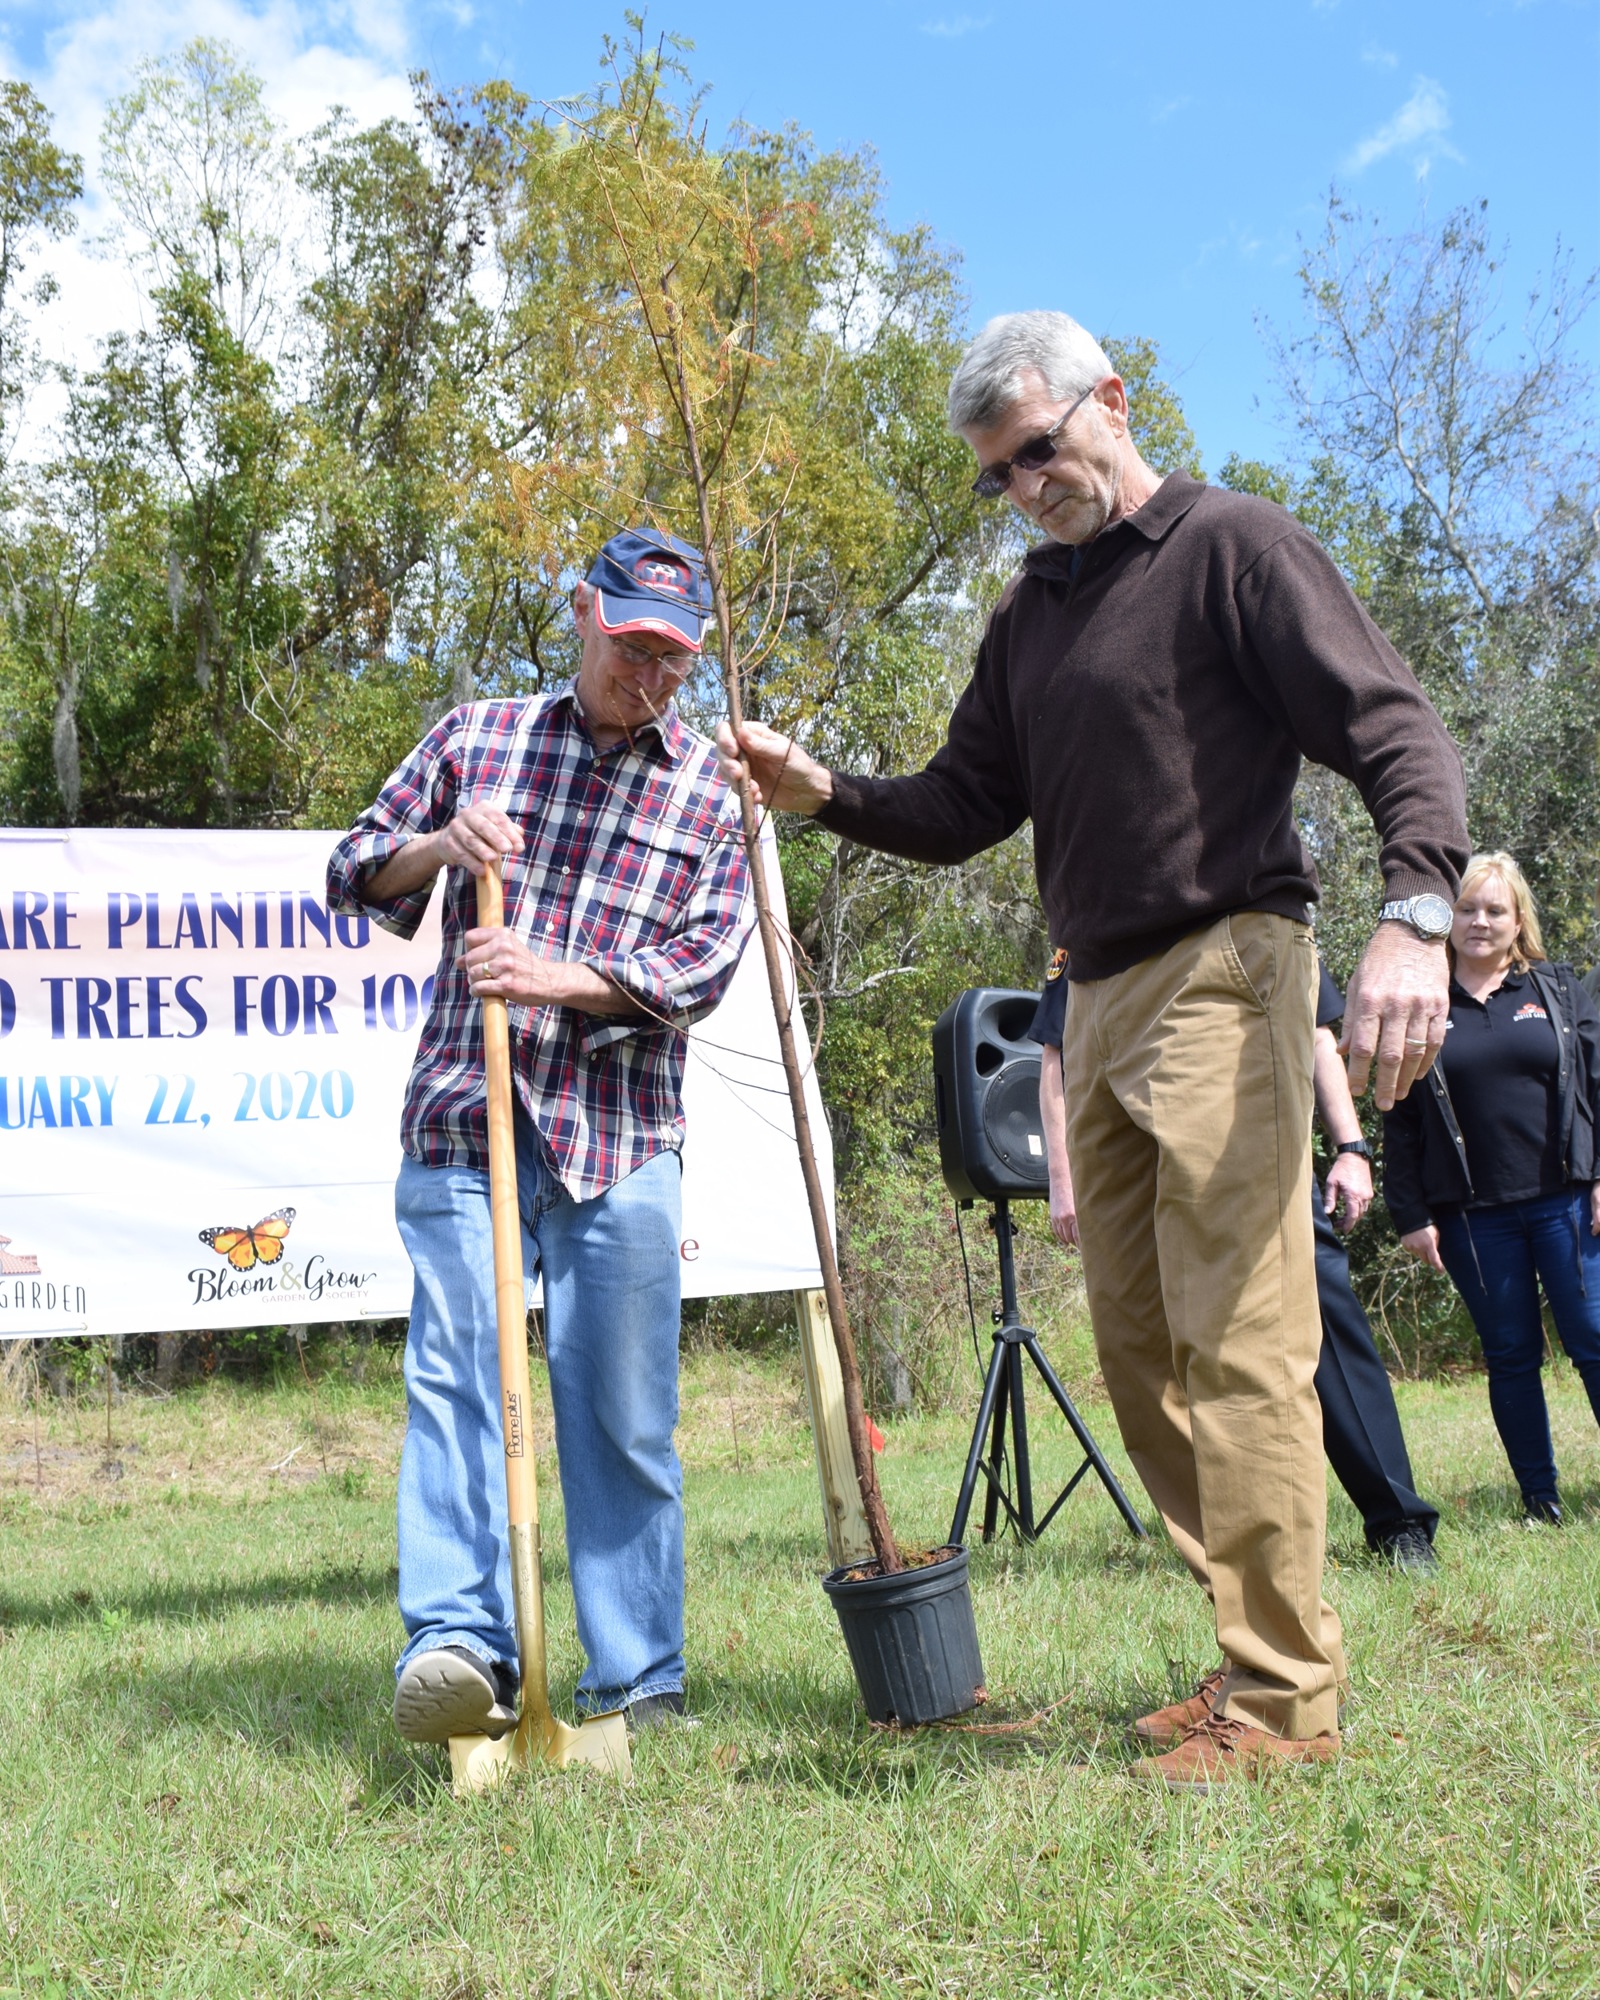 Winter Garden Mayor John Rees and City Manager Mike Bollhoefer helped plant the 1,000th tree.